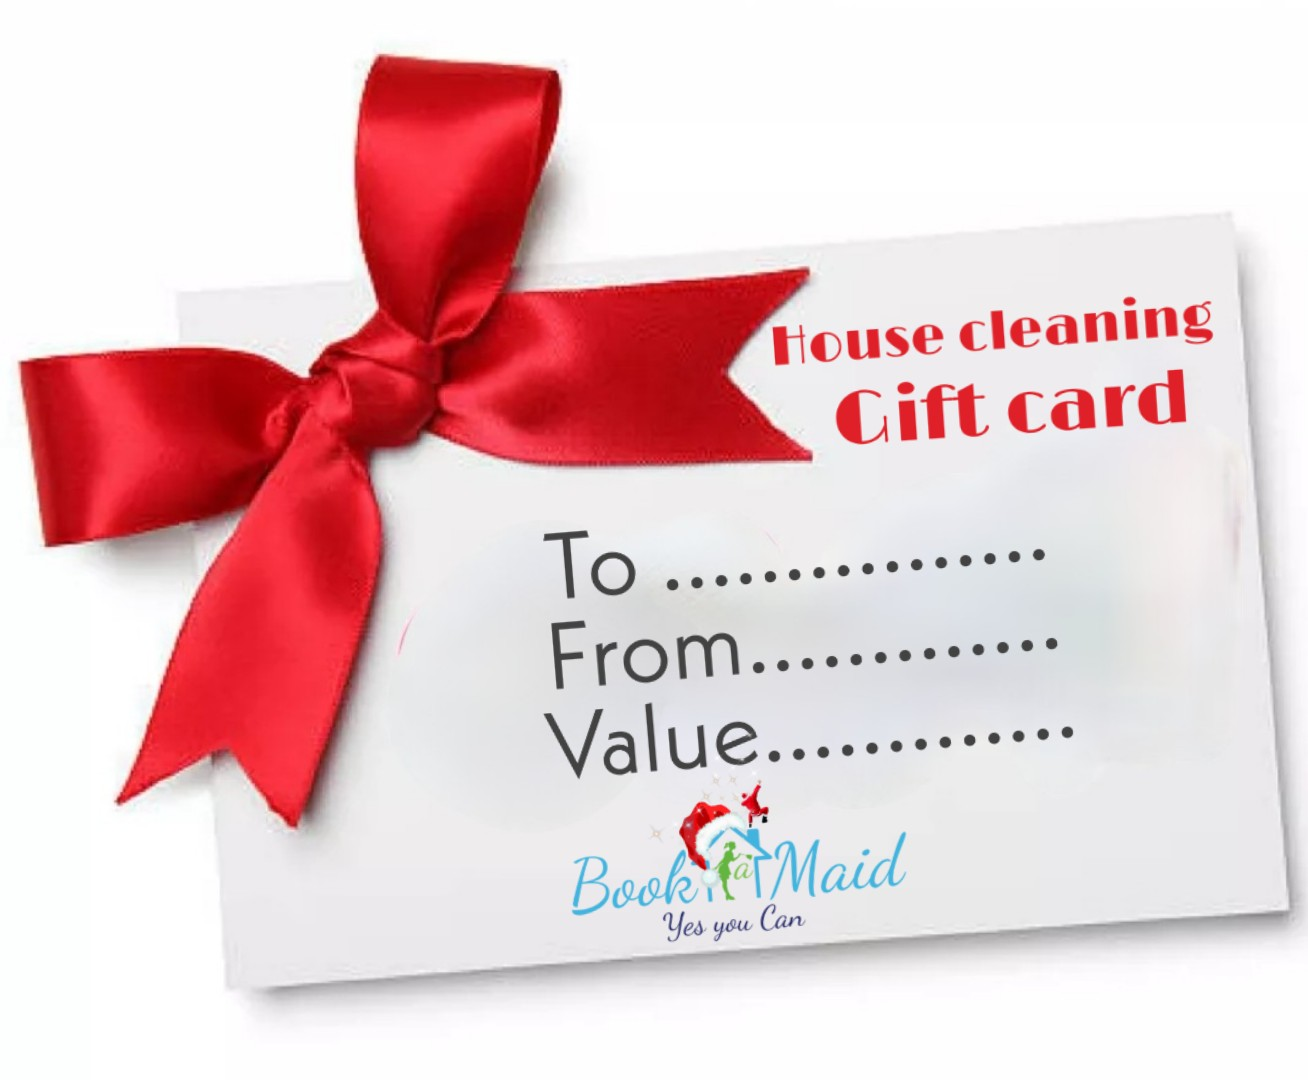 House cleaning gift card